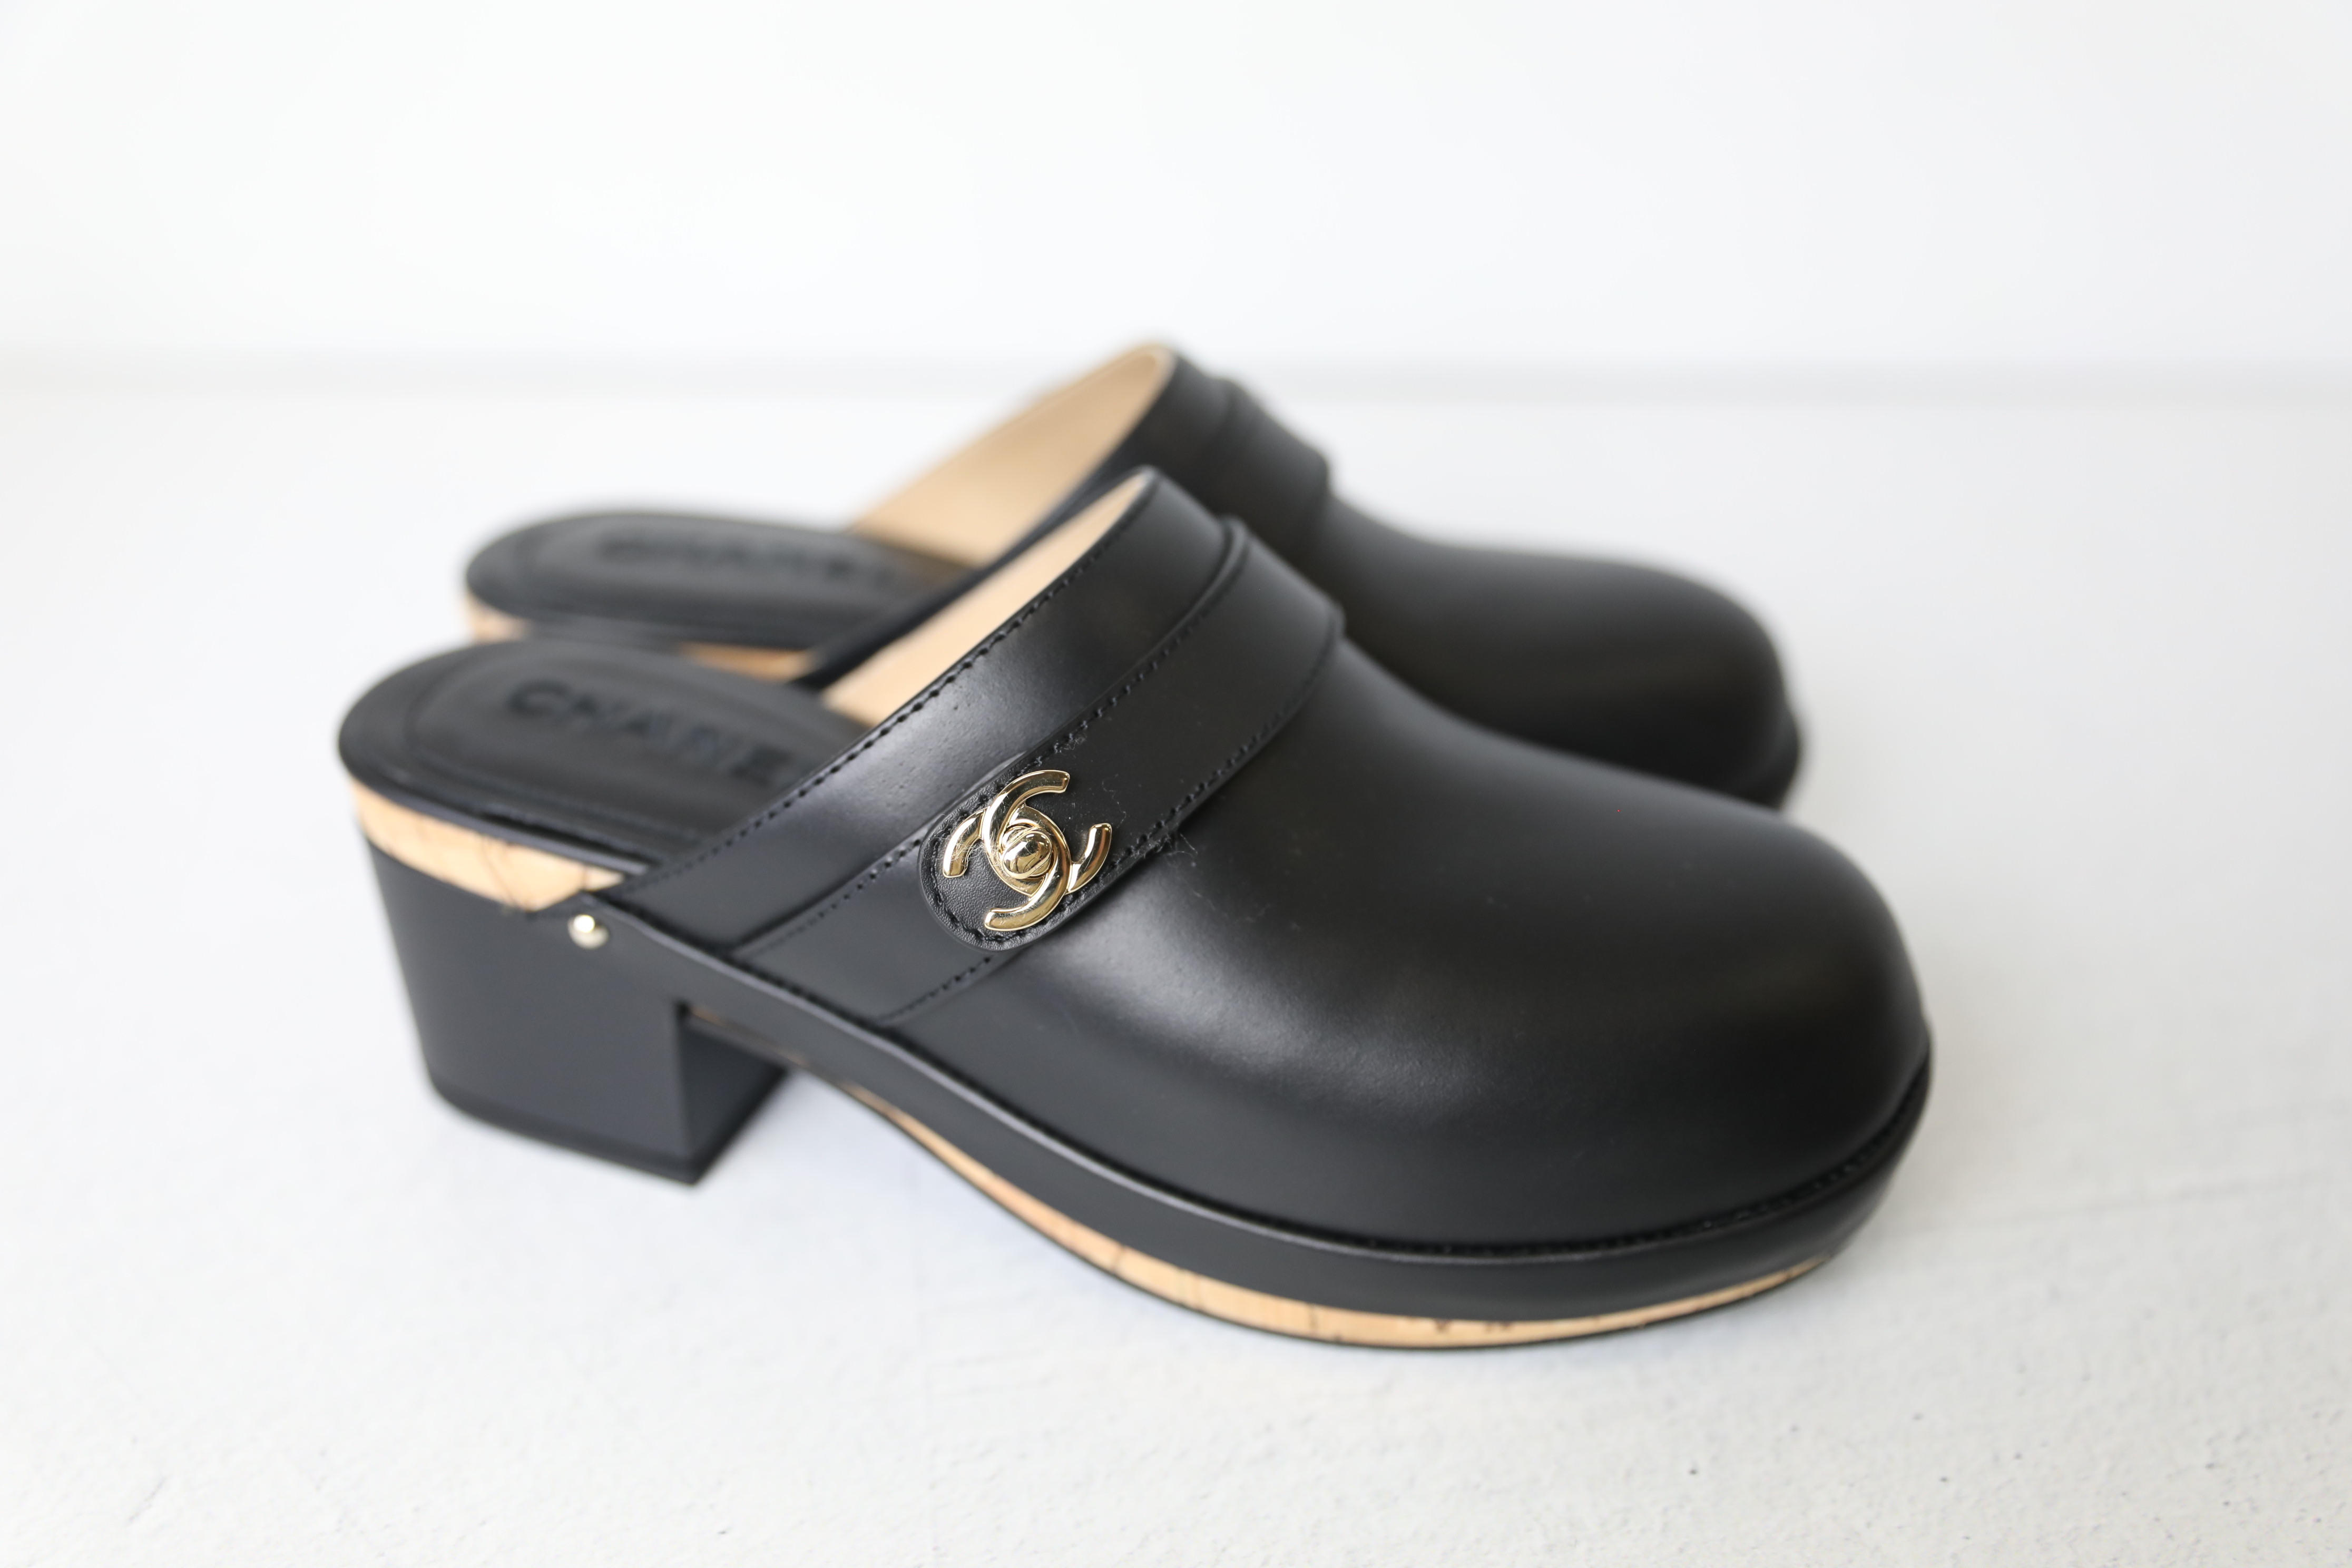 Chanel Shoes Turnlock Clogs, Black, Size 37, New in Box WA001